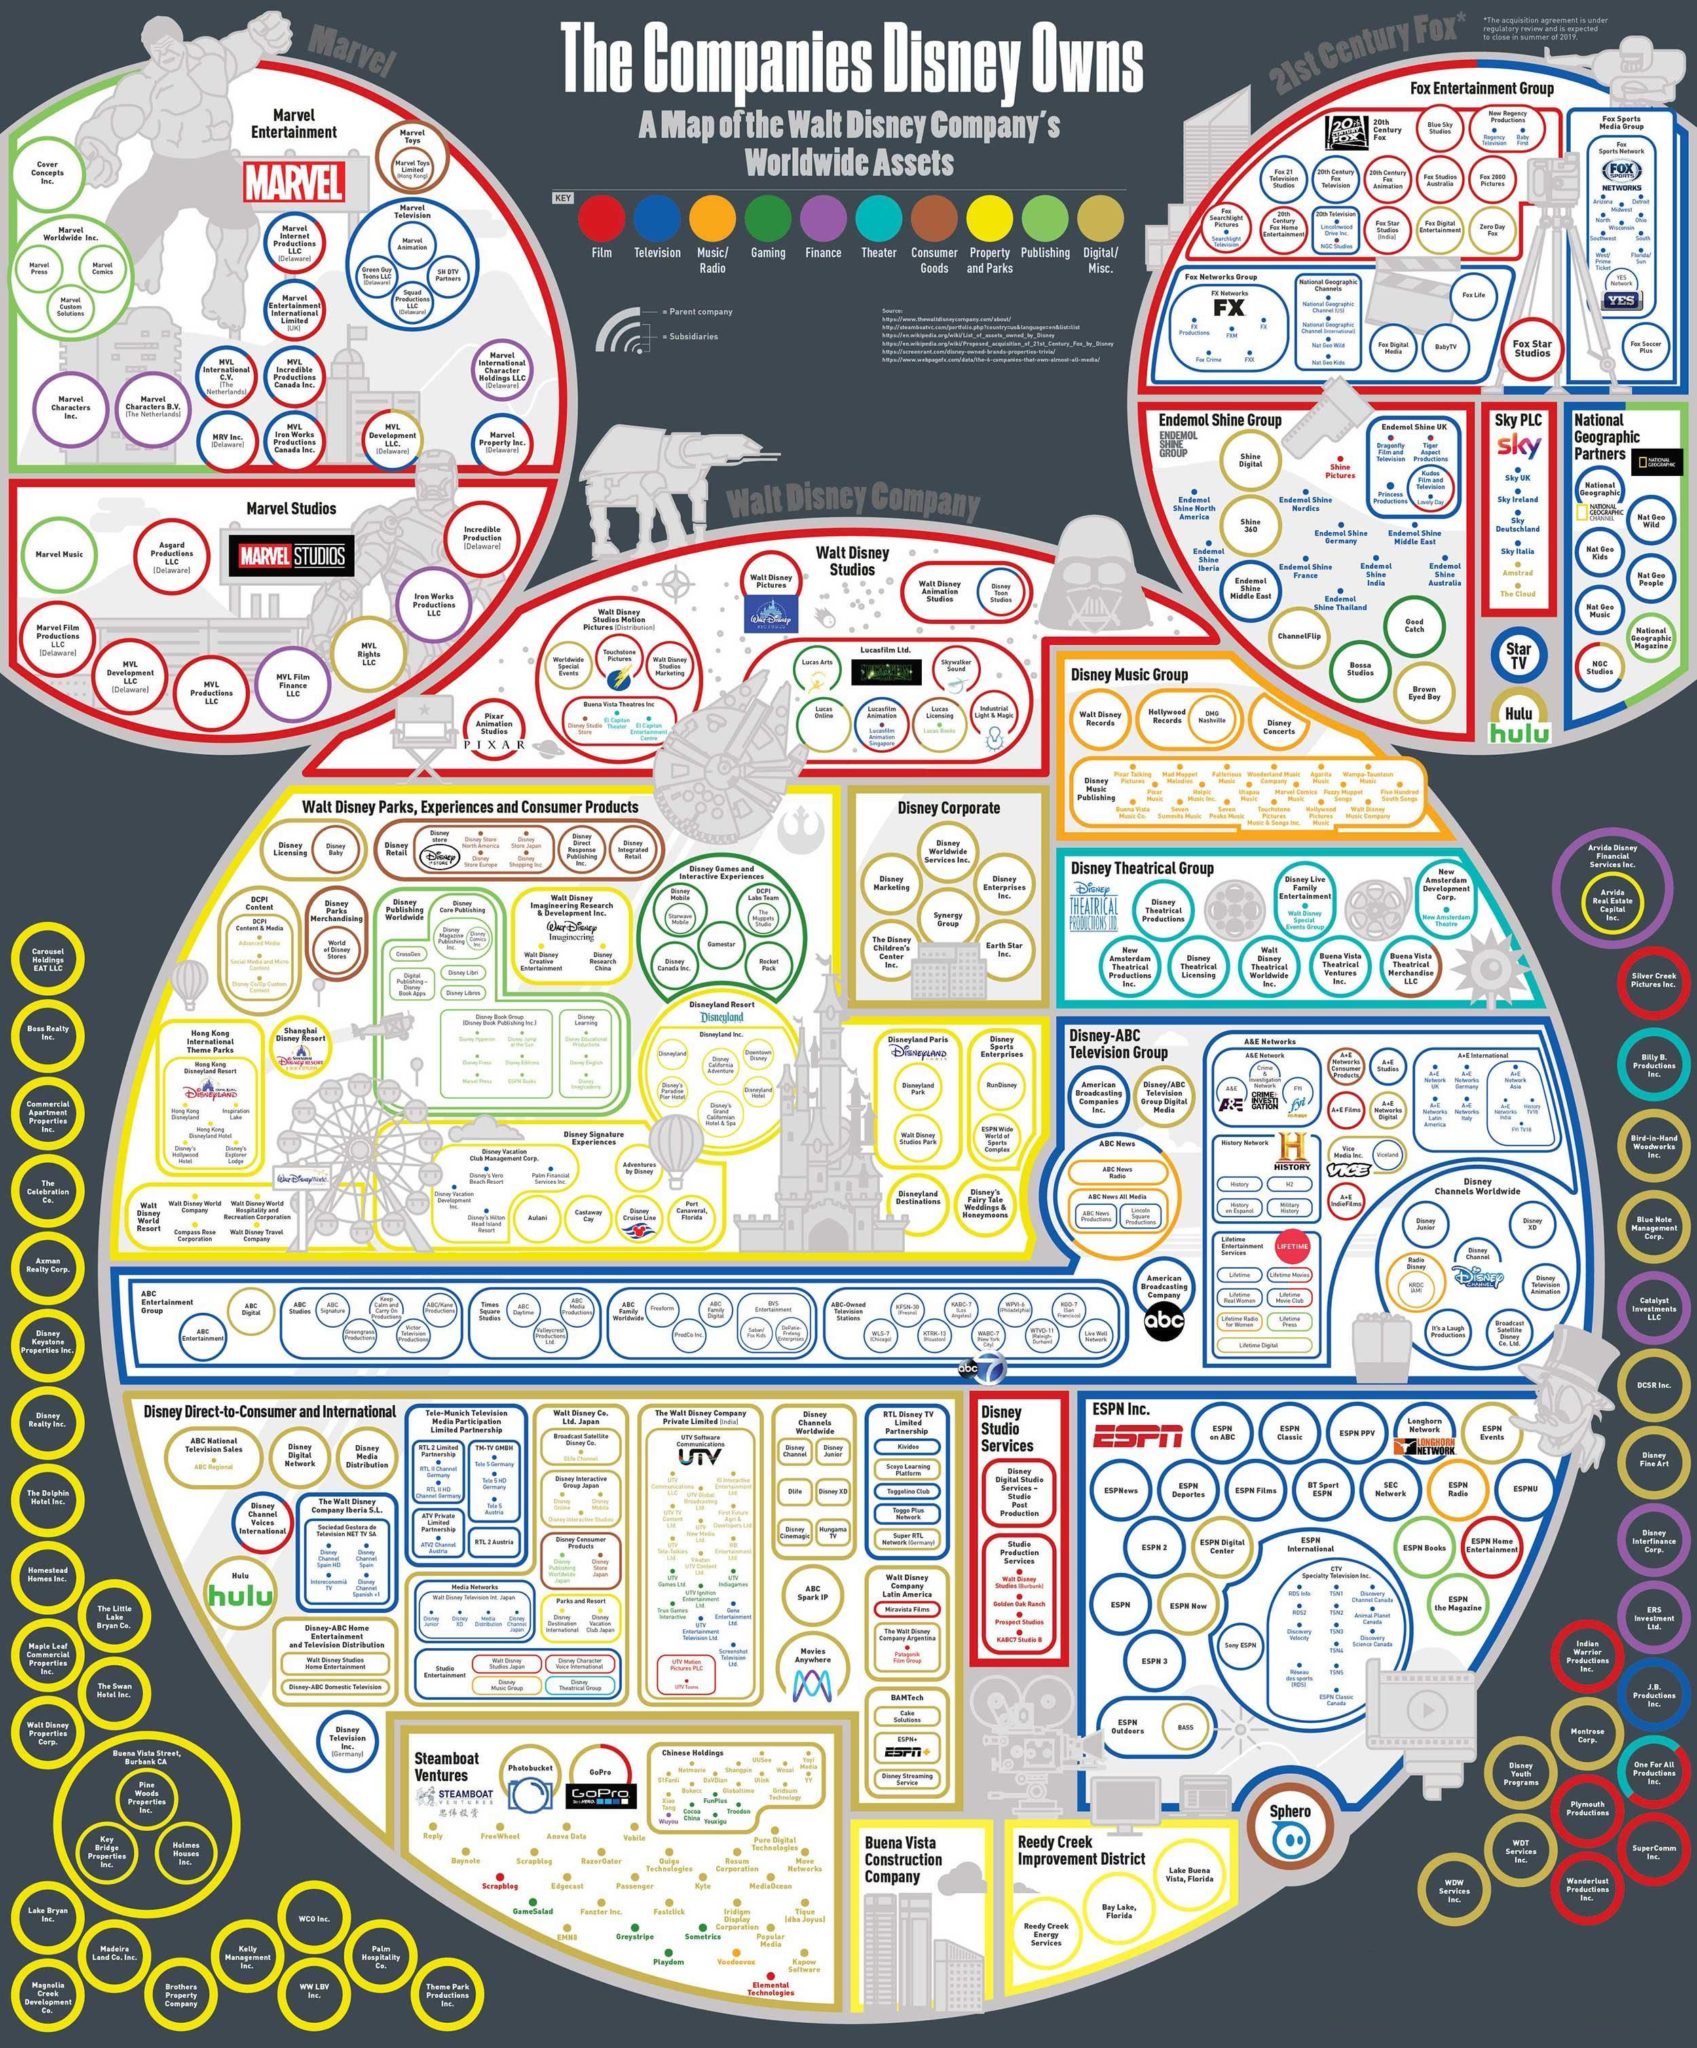 The Companies Disney Owns - All Disney Assets